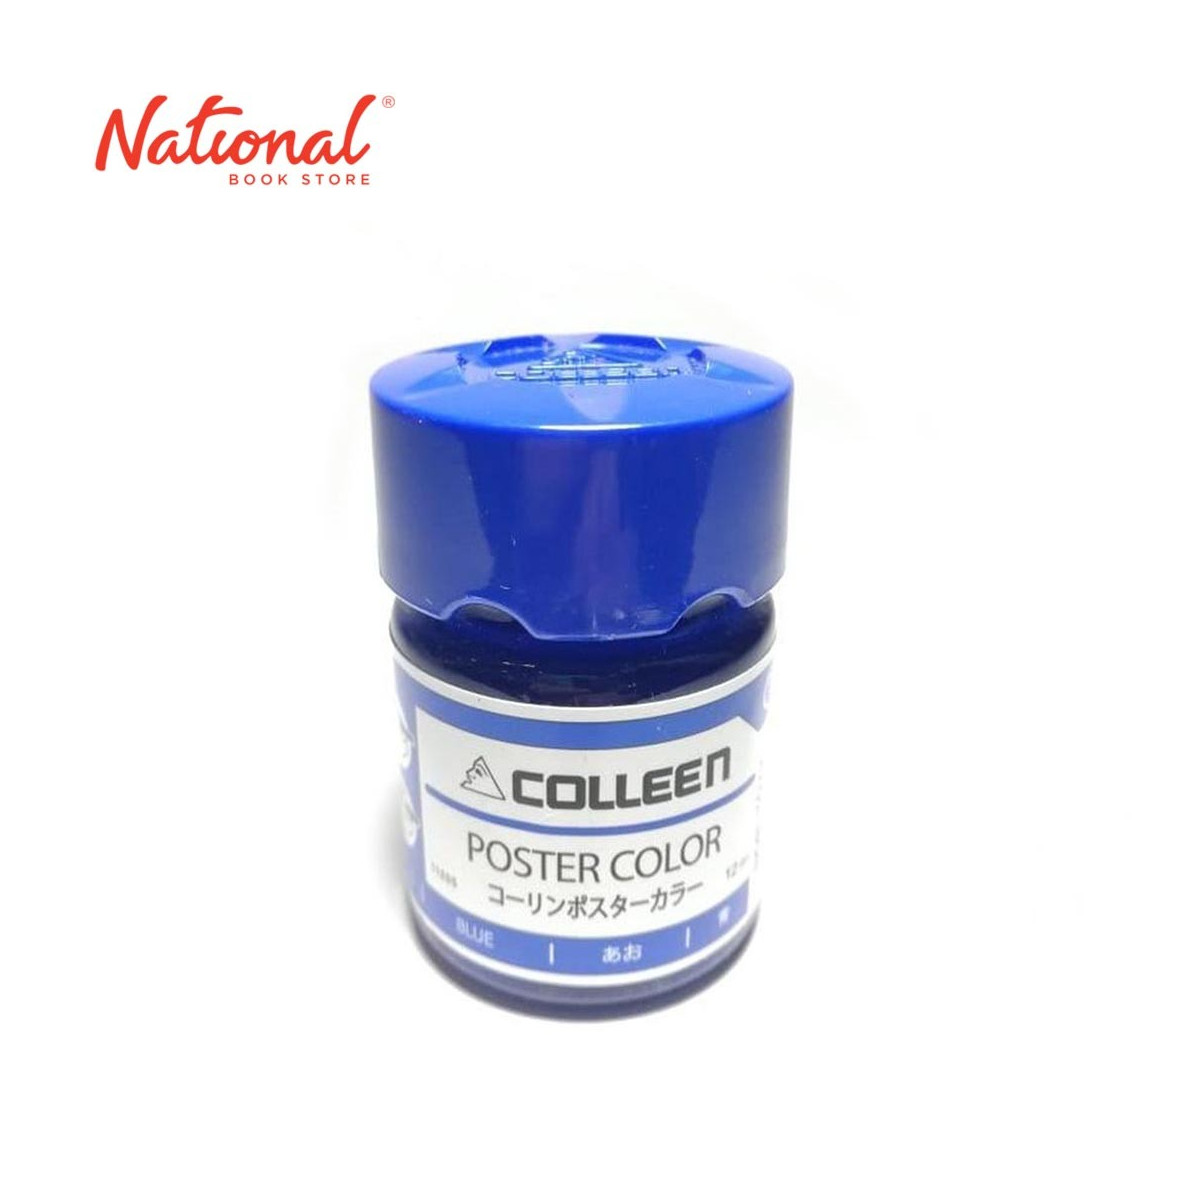 COLLEEN POSTER COLOR 12001 20ML, 12005 BLUE